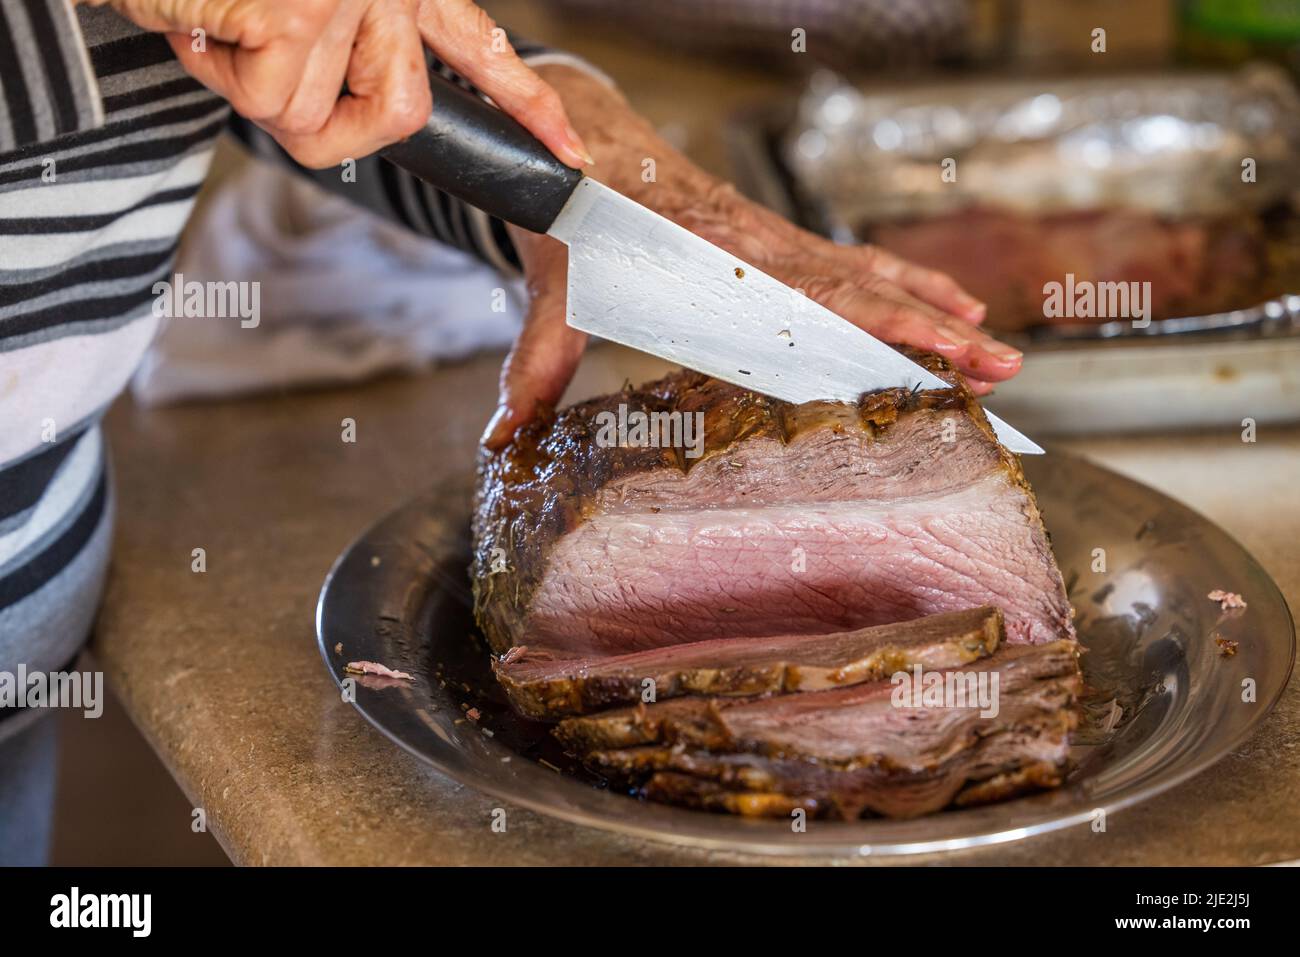 https://c8.alamy.com/comp/2JE2J5J/a-woman-slicing-a-large-prime-rib-beef-roast-that-was-baked-and-roasted-in-the-oven-by-a-home-gourmet-chef-for-a-holiday-christmas-dinner-2JE2J5J.jpg